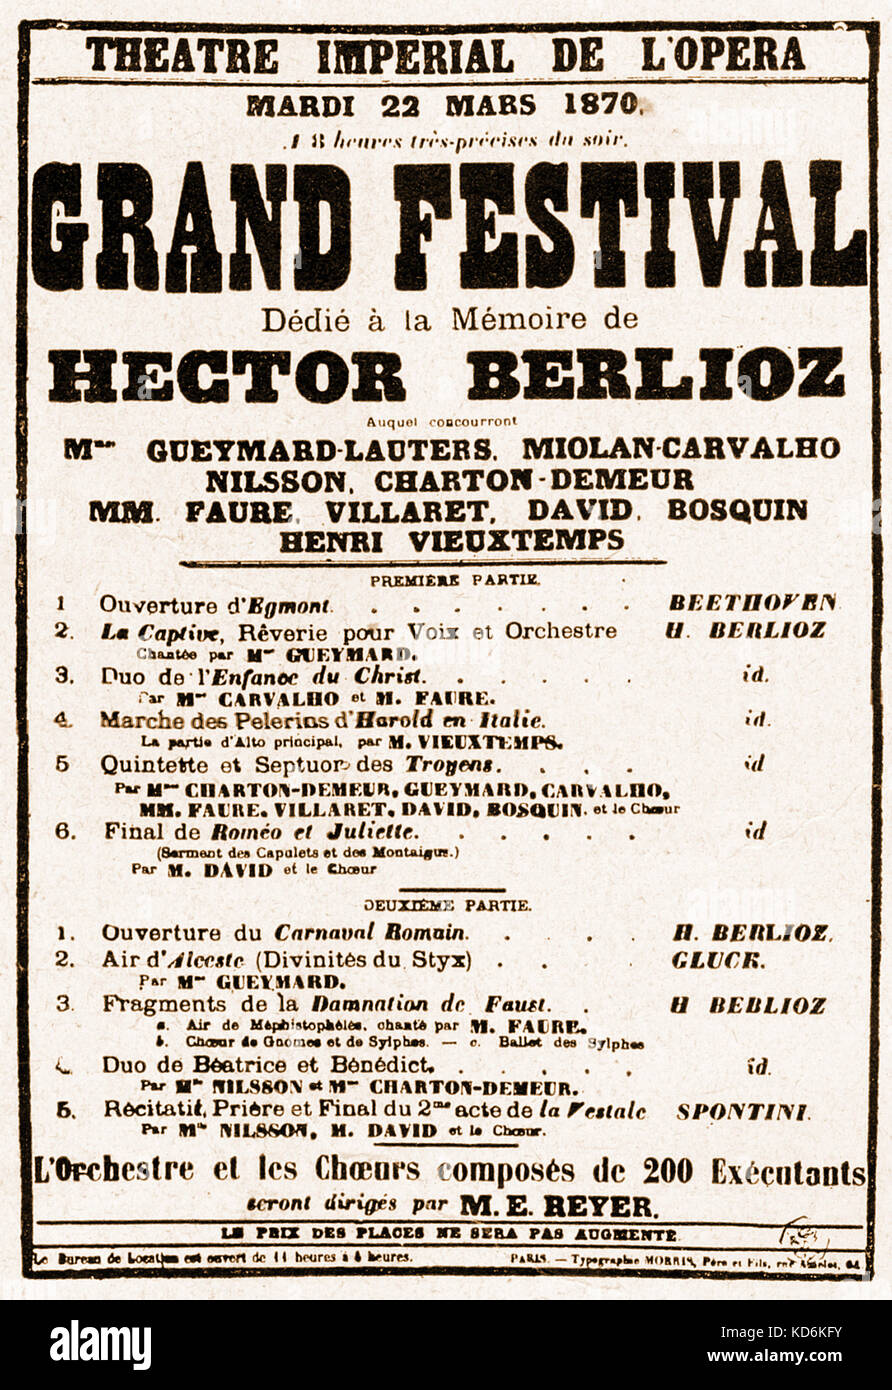 Hector Berlioz Festival at Théâtre Impérial de l'Opéra 23rd March 1870, Paris.  Work by Gluck, Beethoven and Berlioz. Flyer or playbill advertising the performance.  Conducted by Reyer.  Paris. Stock Photo